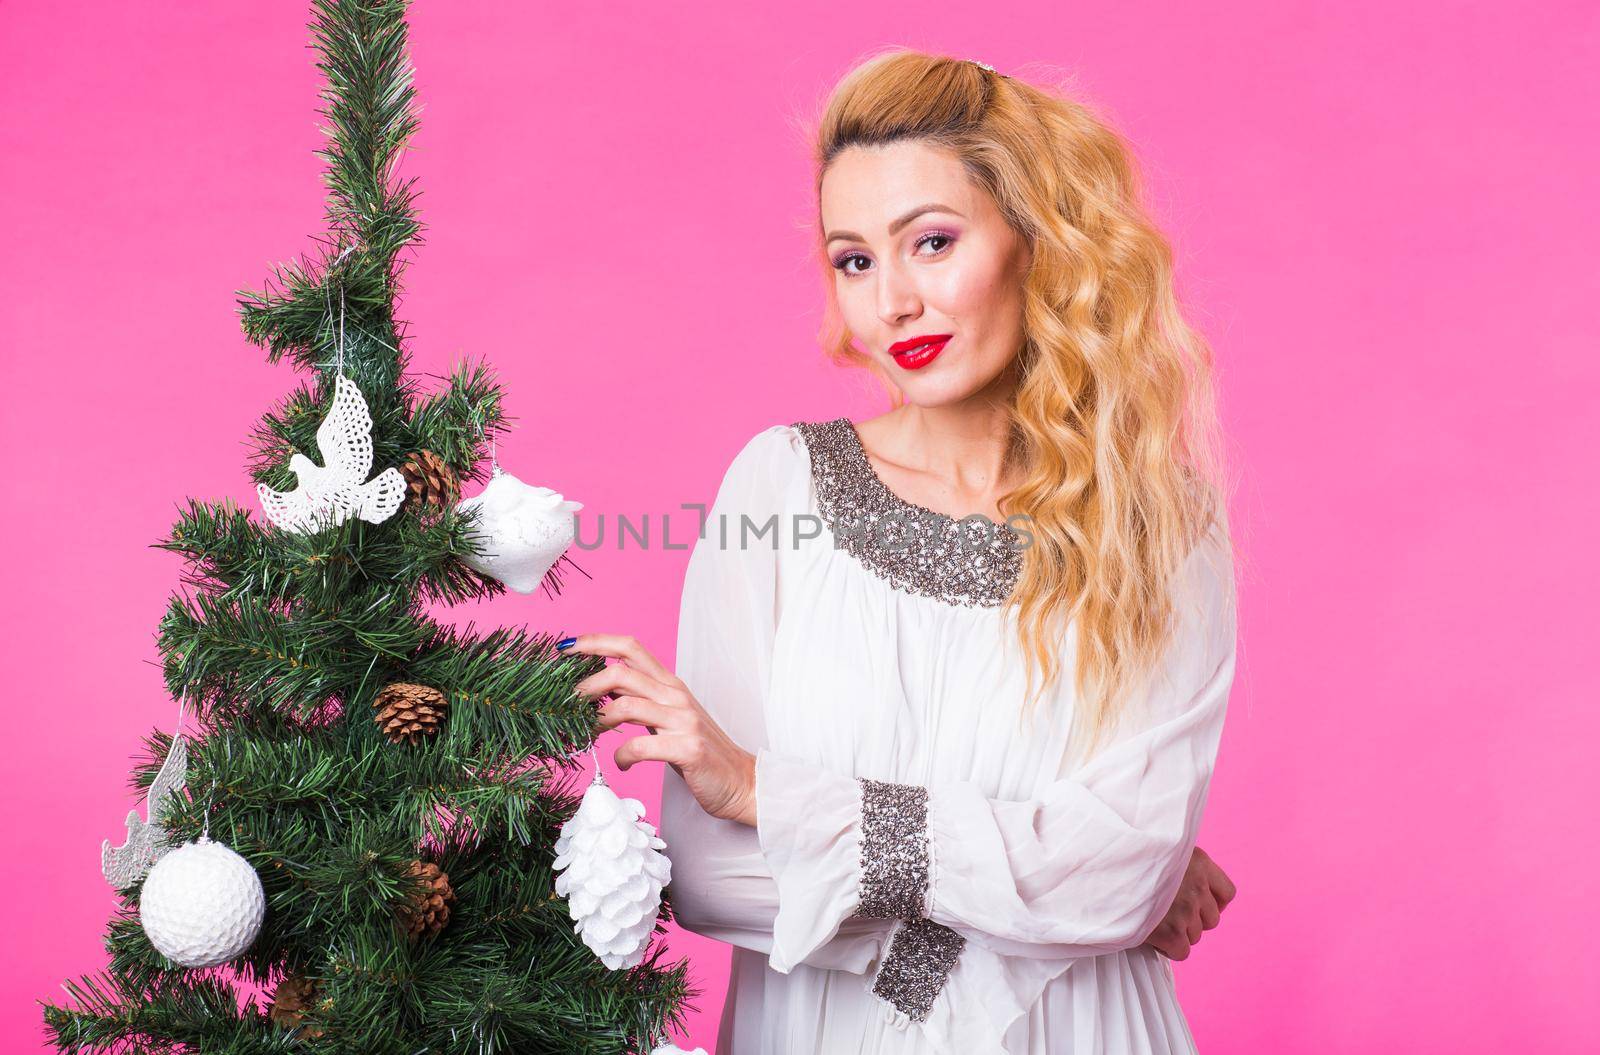 Christmas and holiday concept - Portrait of smiling beautiful blonde woman with Christmas tree on pink background.